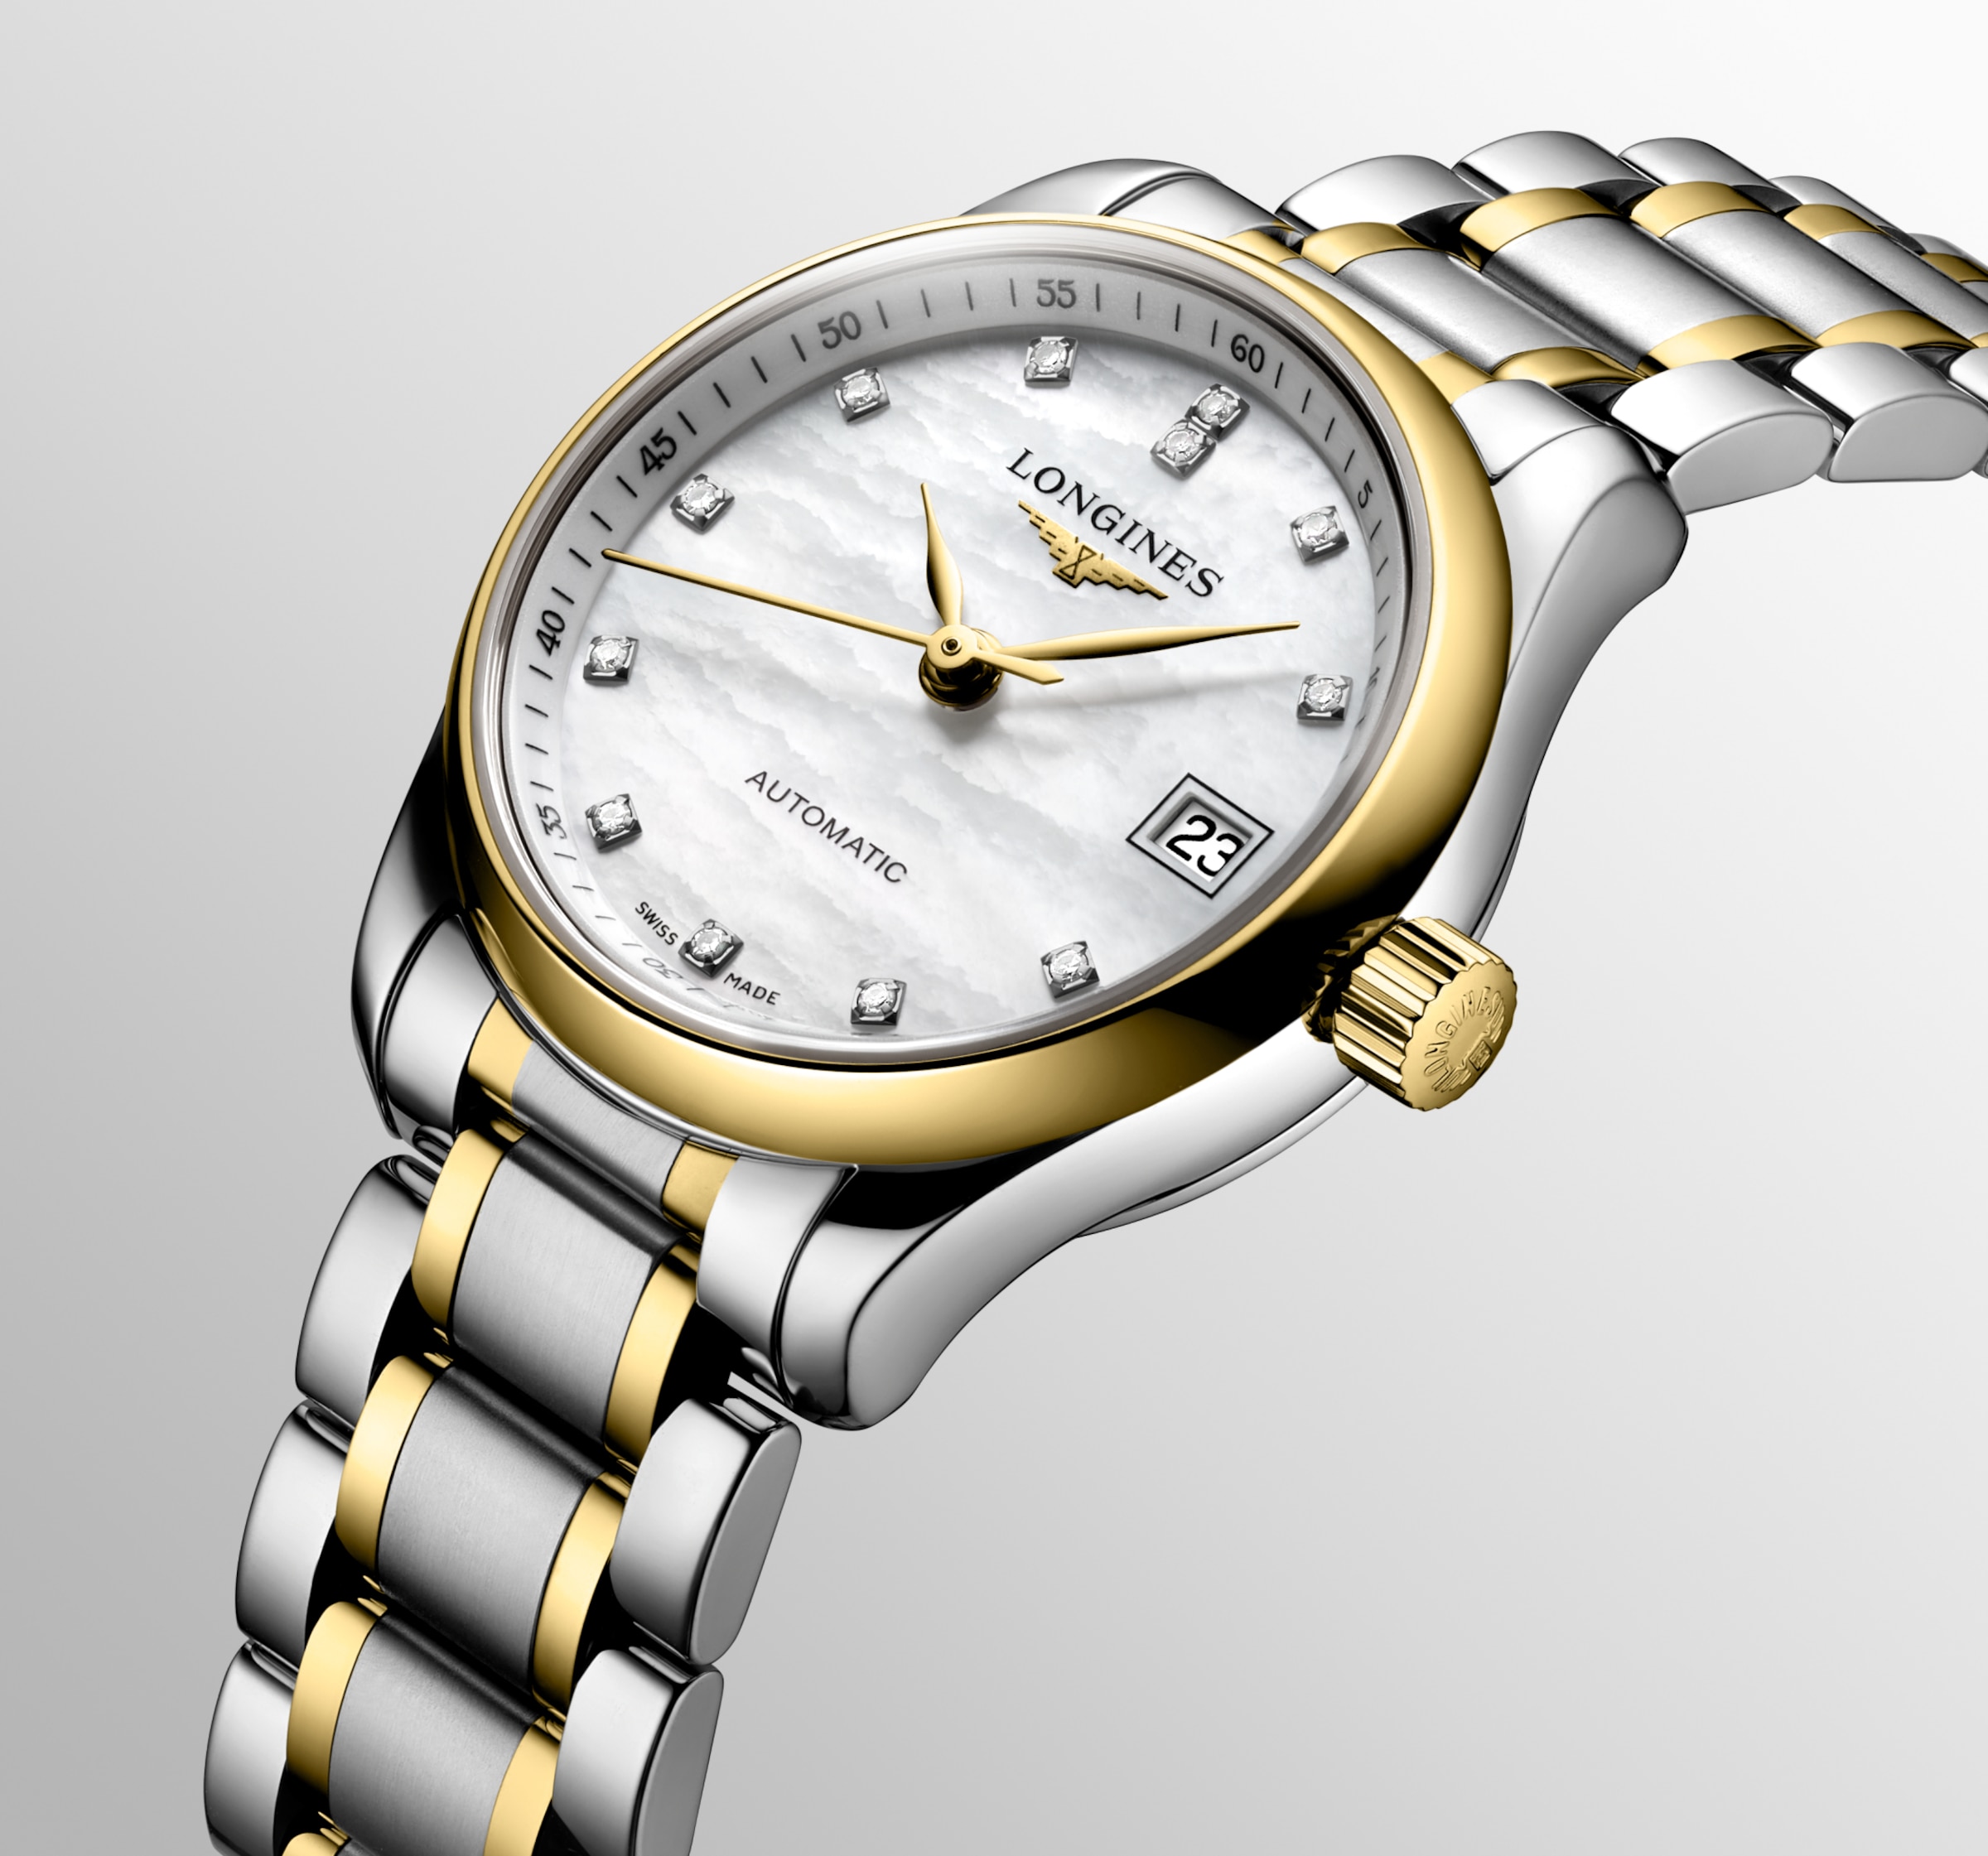 Longines MASTER COLLECTION Automatic Stainless steel and 18 karat yellow gold Watch - L2.128.5.87.7